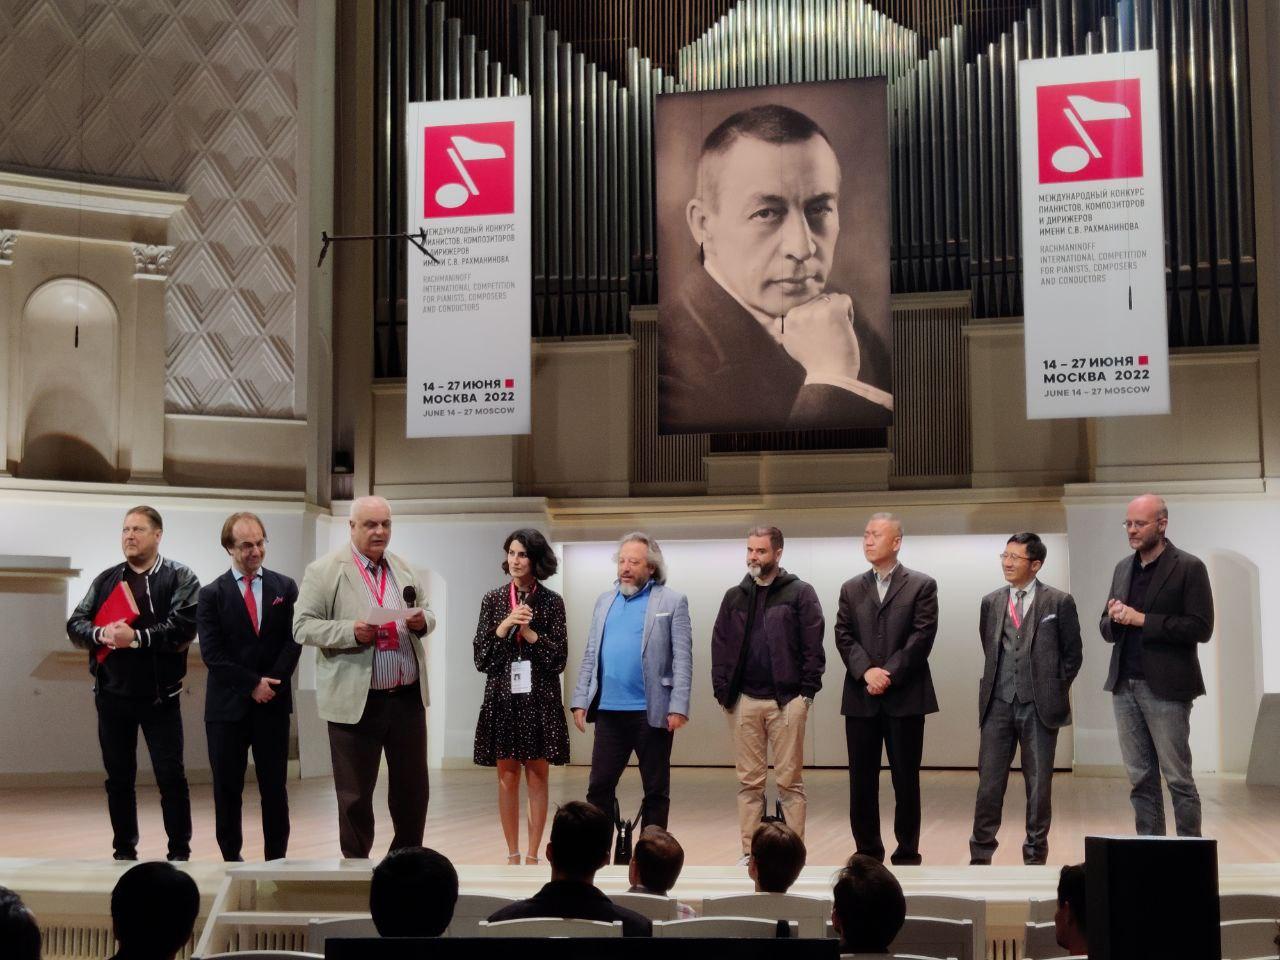 Participants to go to the II Round of the Conducting category of the Rachmaninoff International Competition have been announced